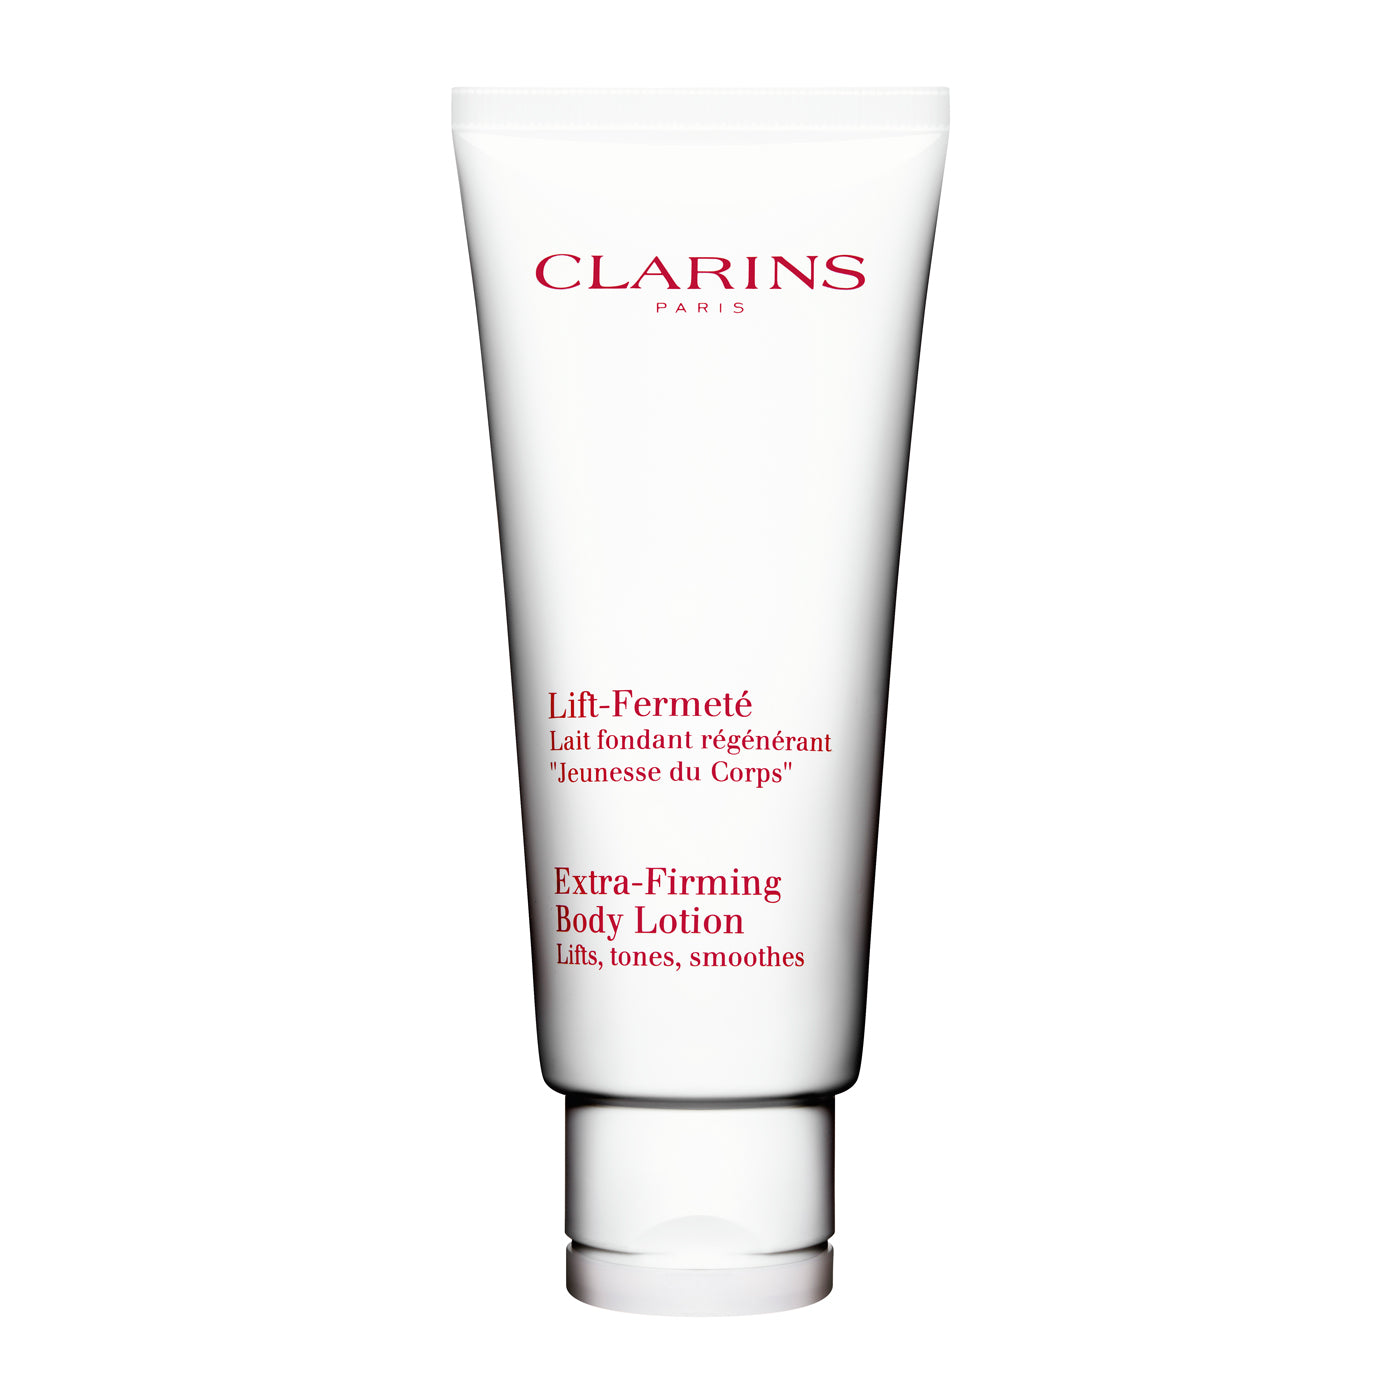 CLARINS Extra-Firming Body Lotion 200ml